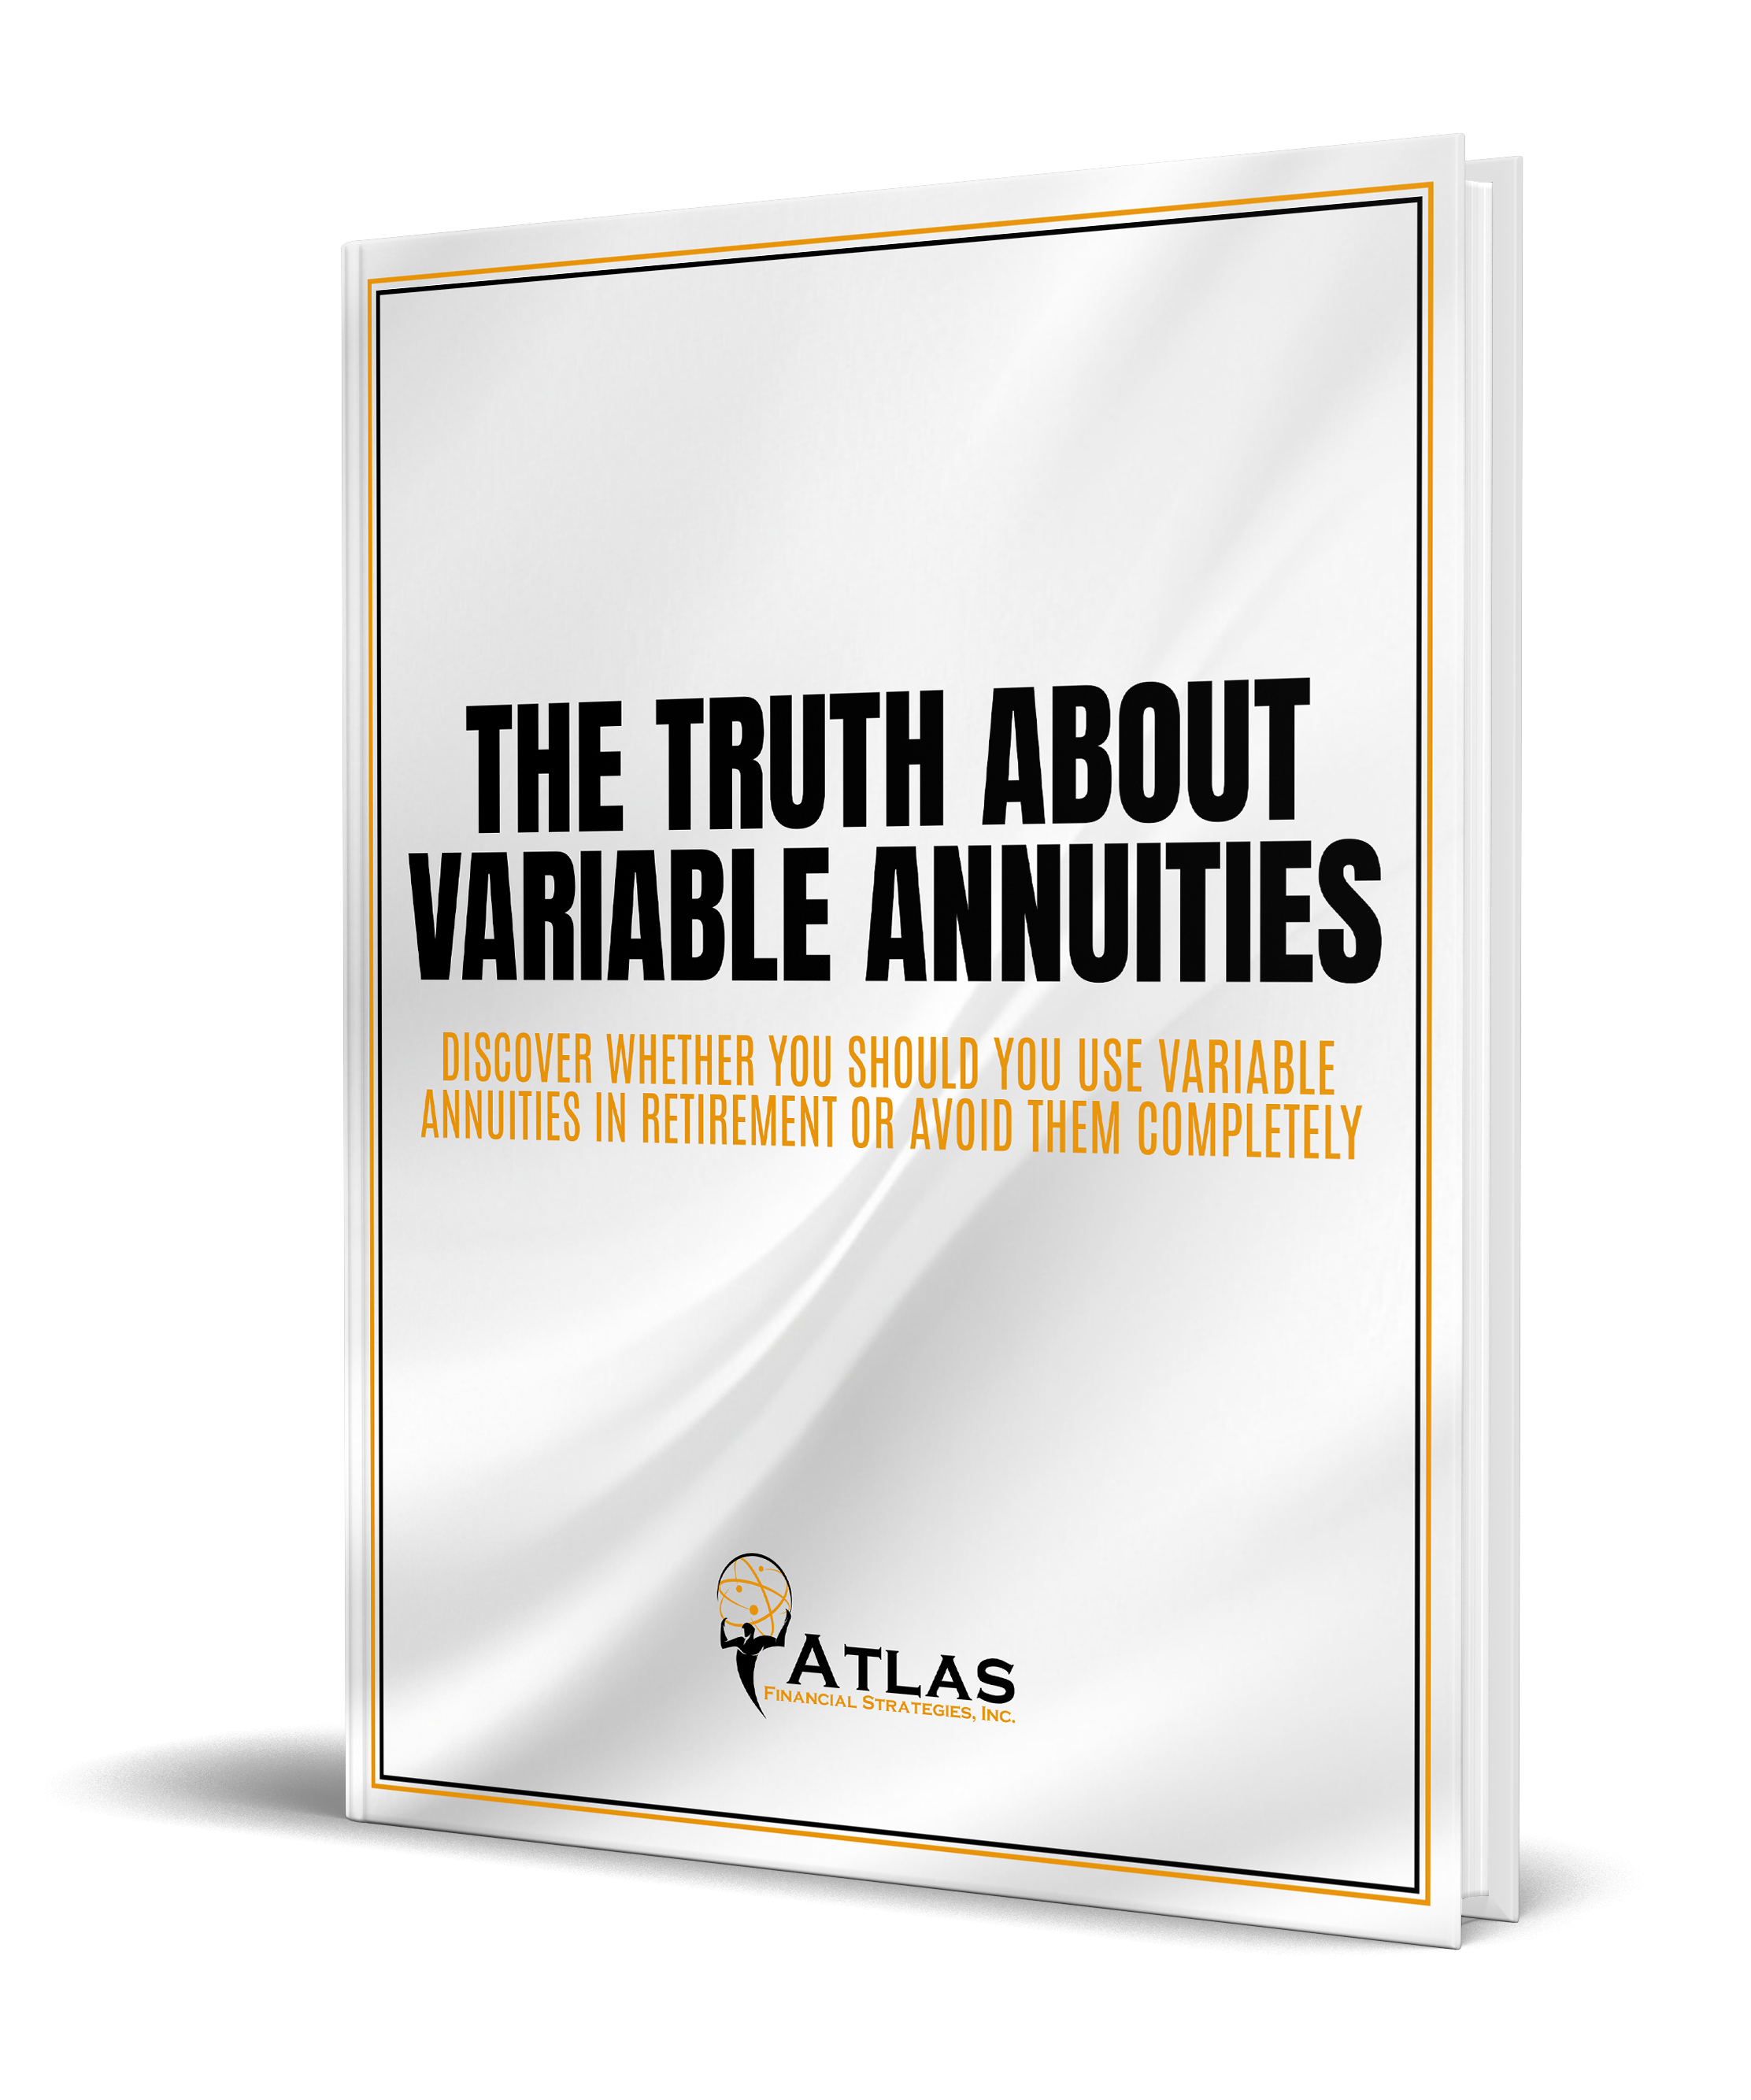 The Truth About Variable Annuities